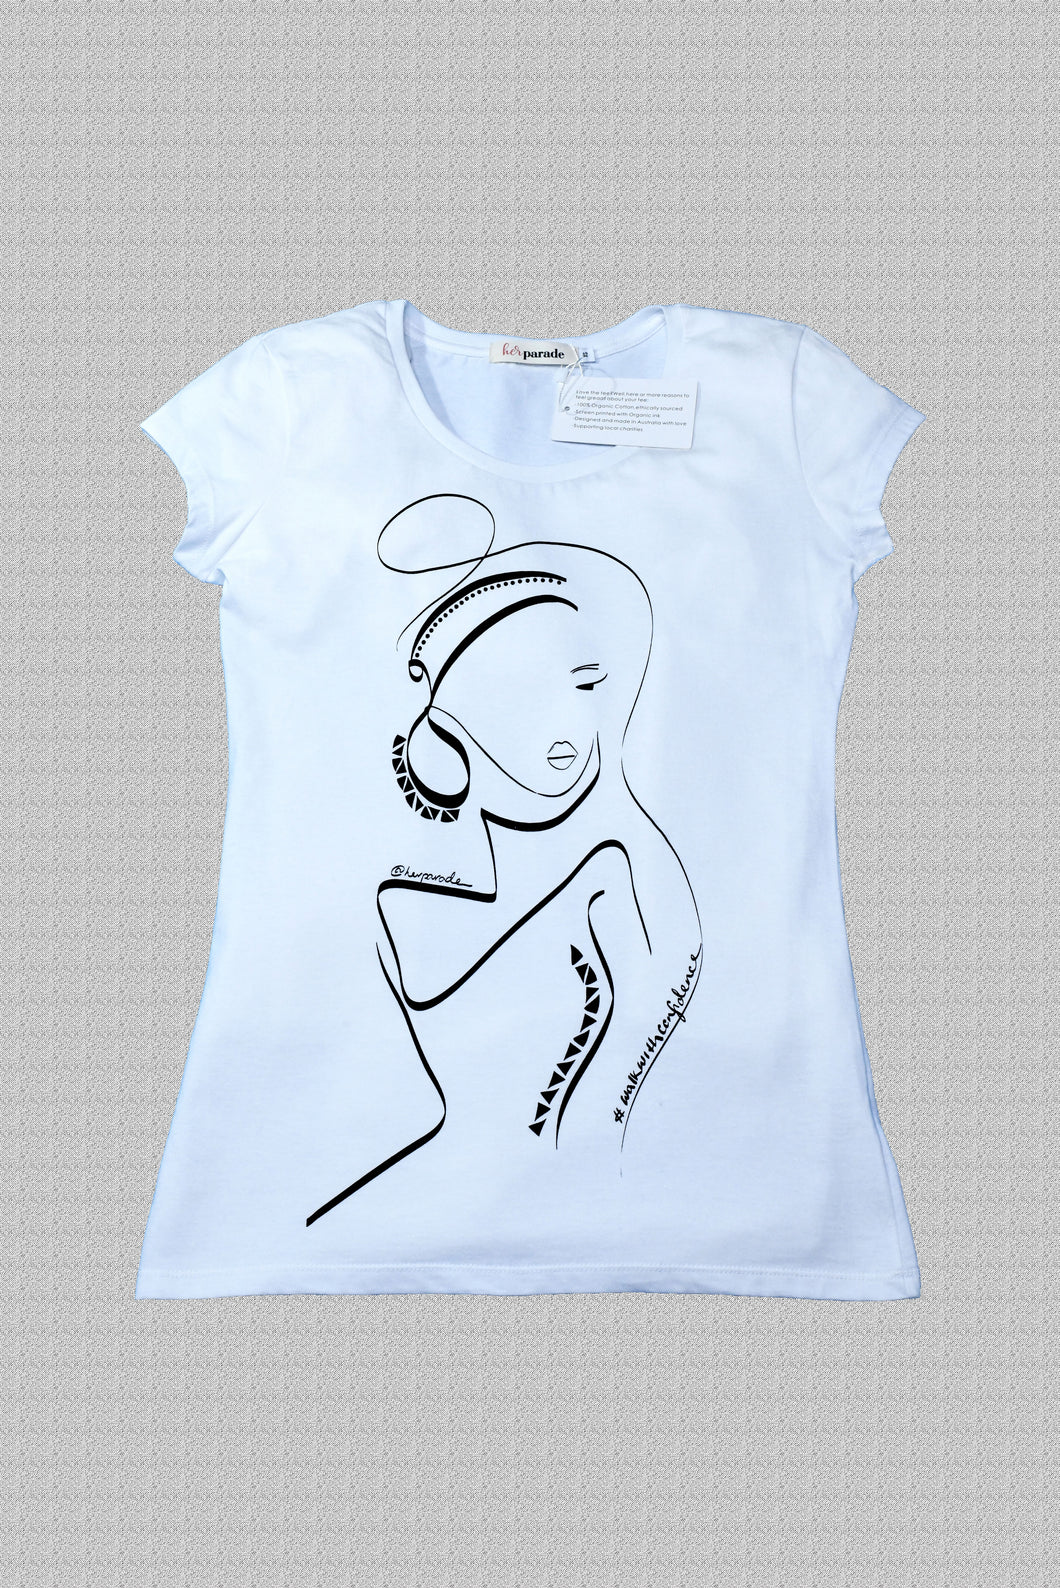 Women's organic cotton fitted tee walk with confidence helping women and their causes - HerParade 